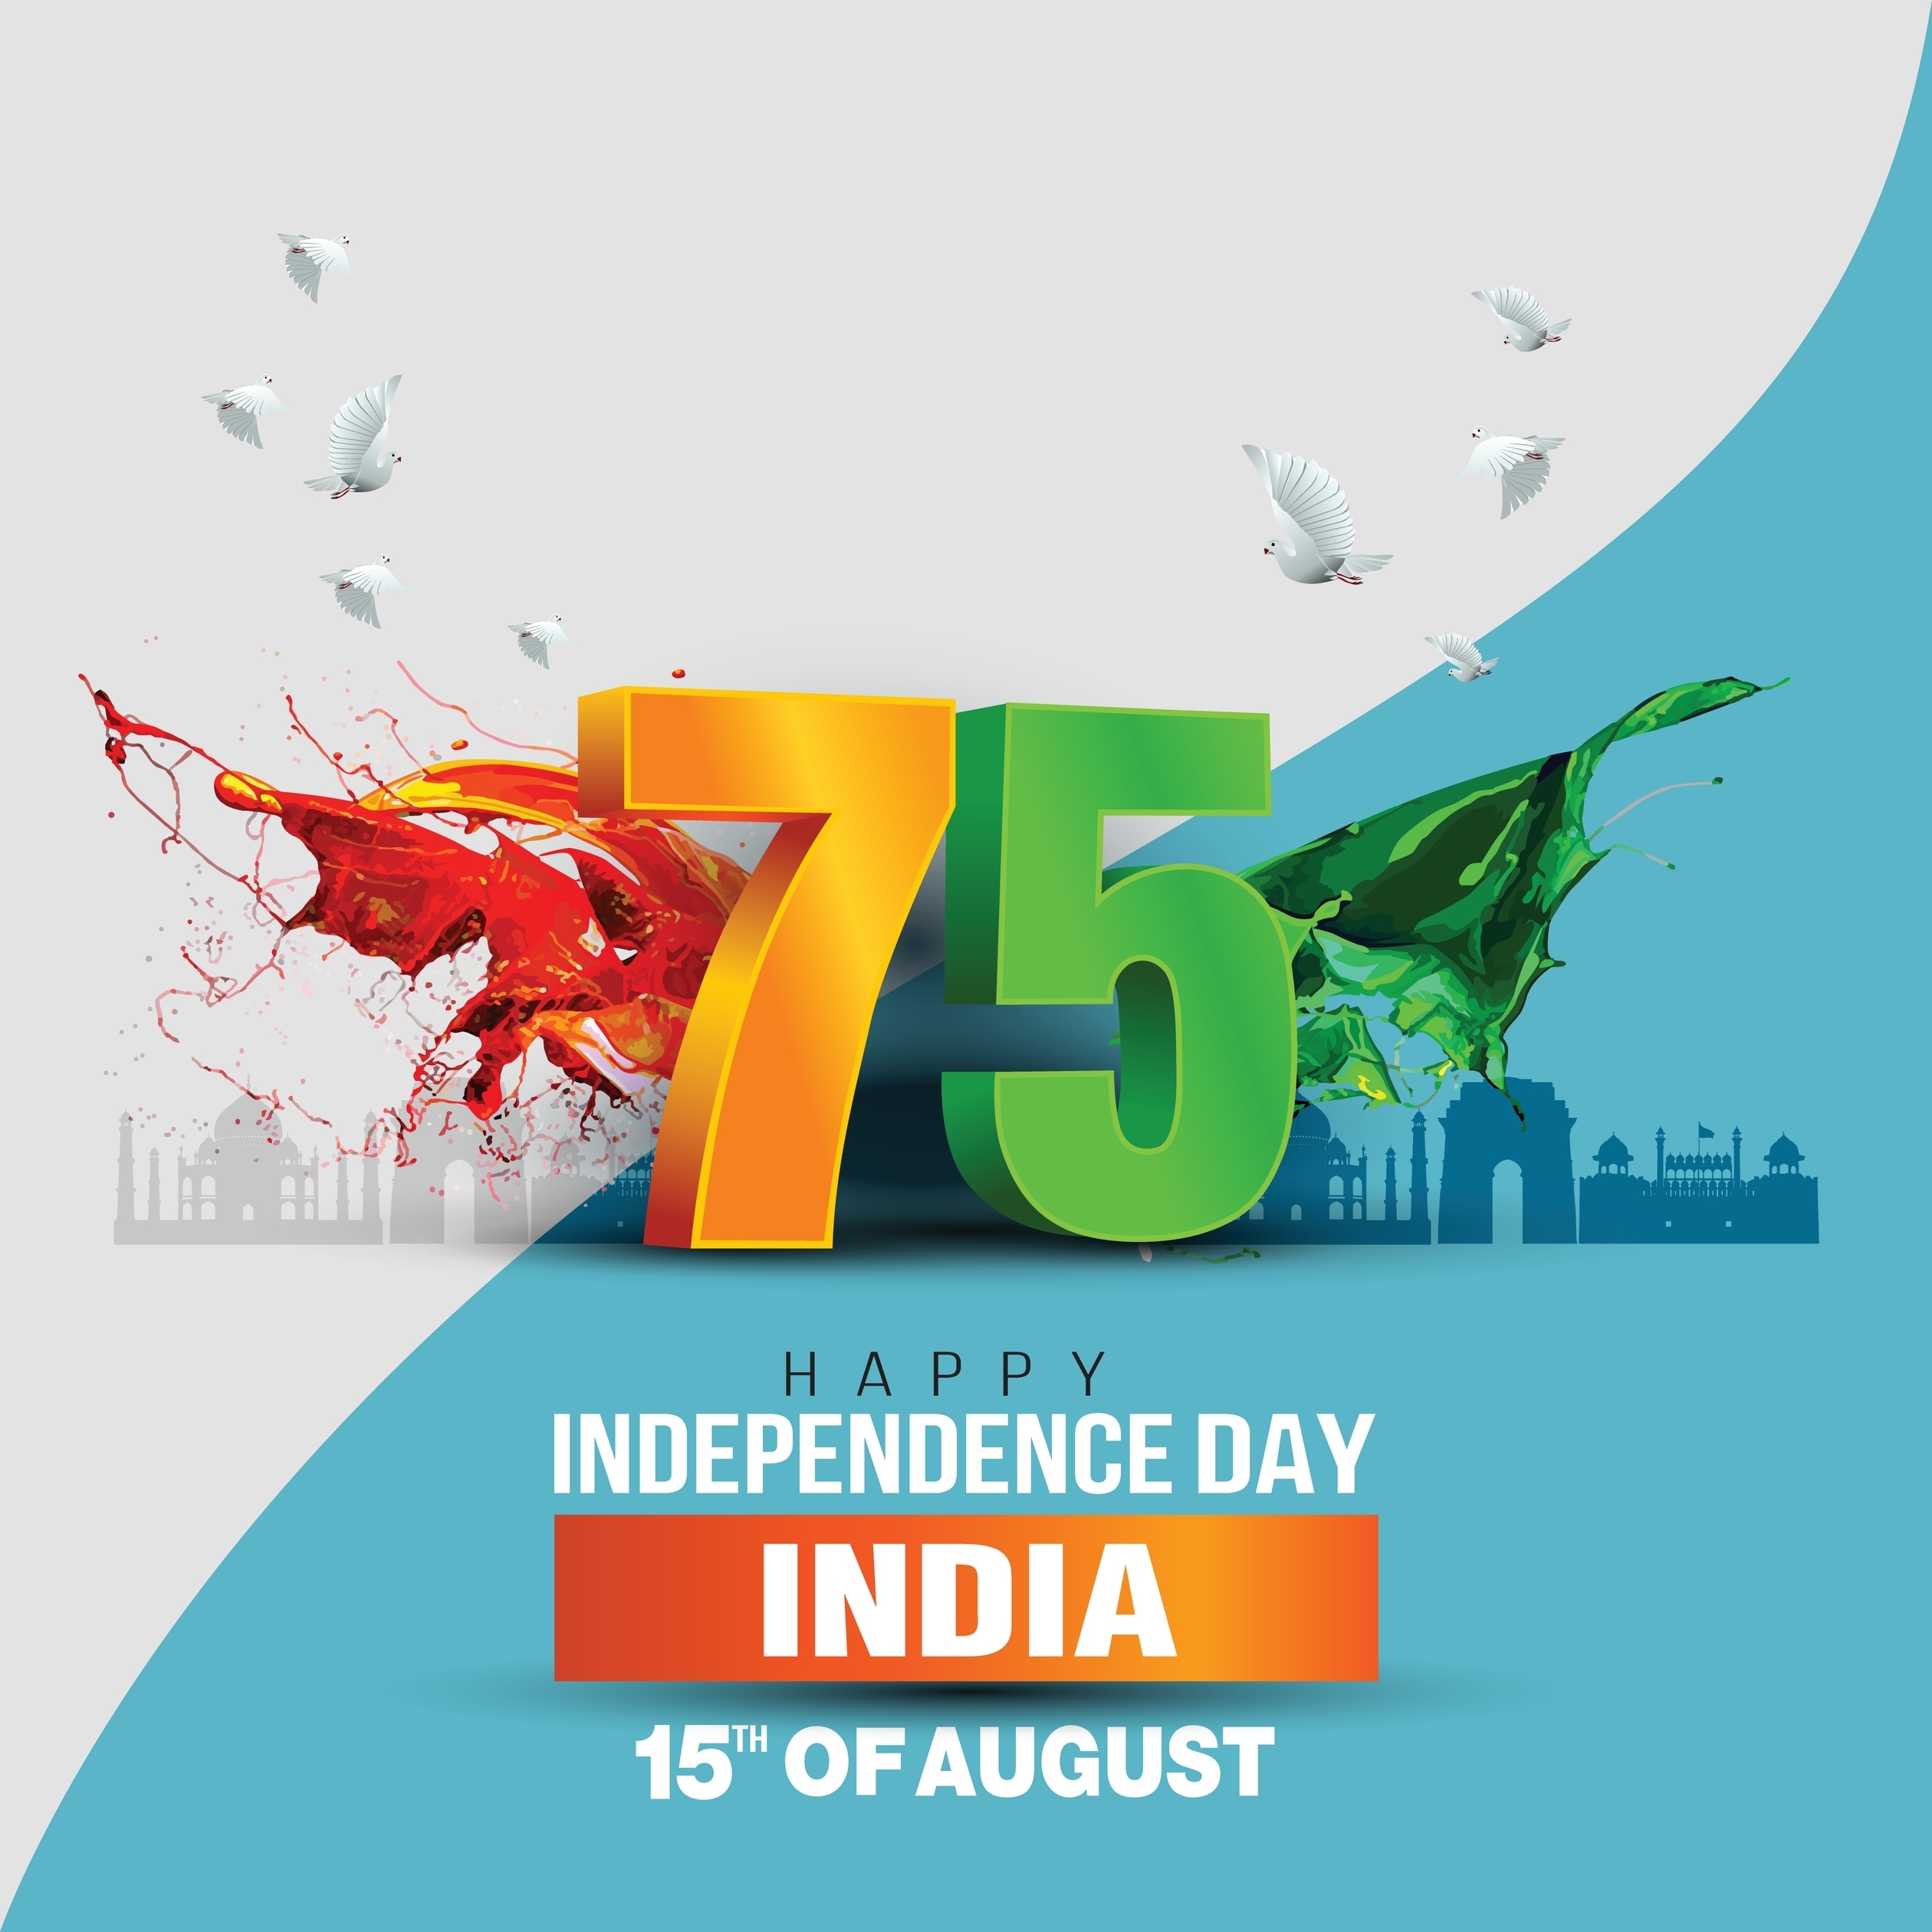 Celebrating 75 years of our independence 🇮🇳 Wishing all the